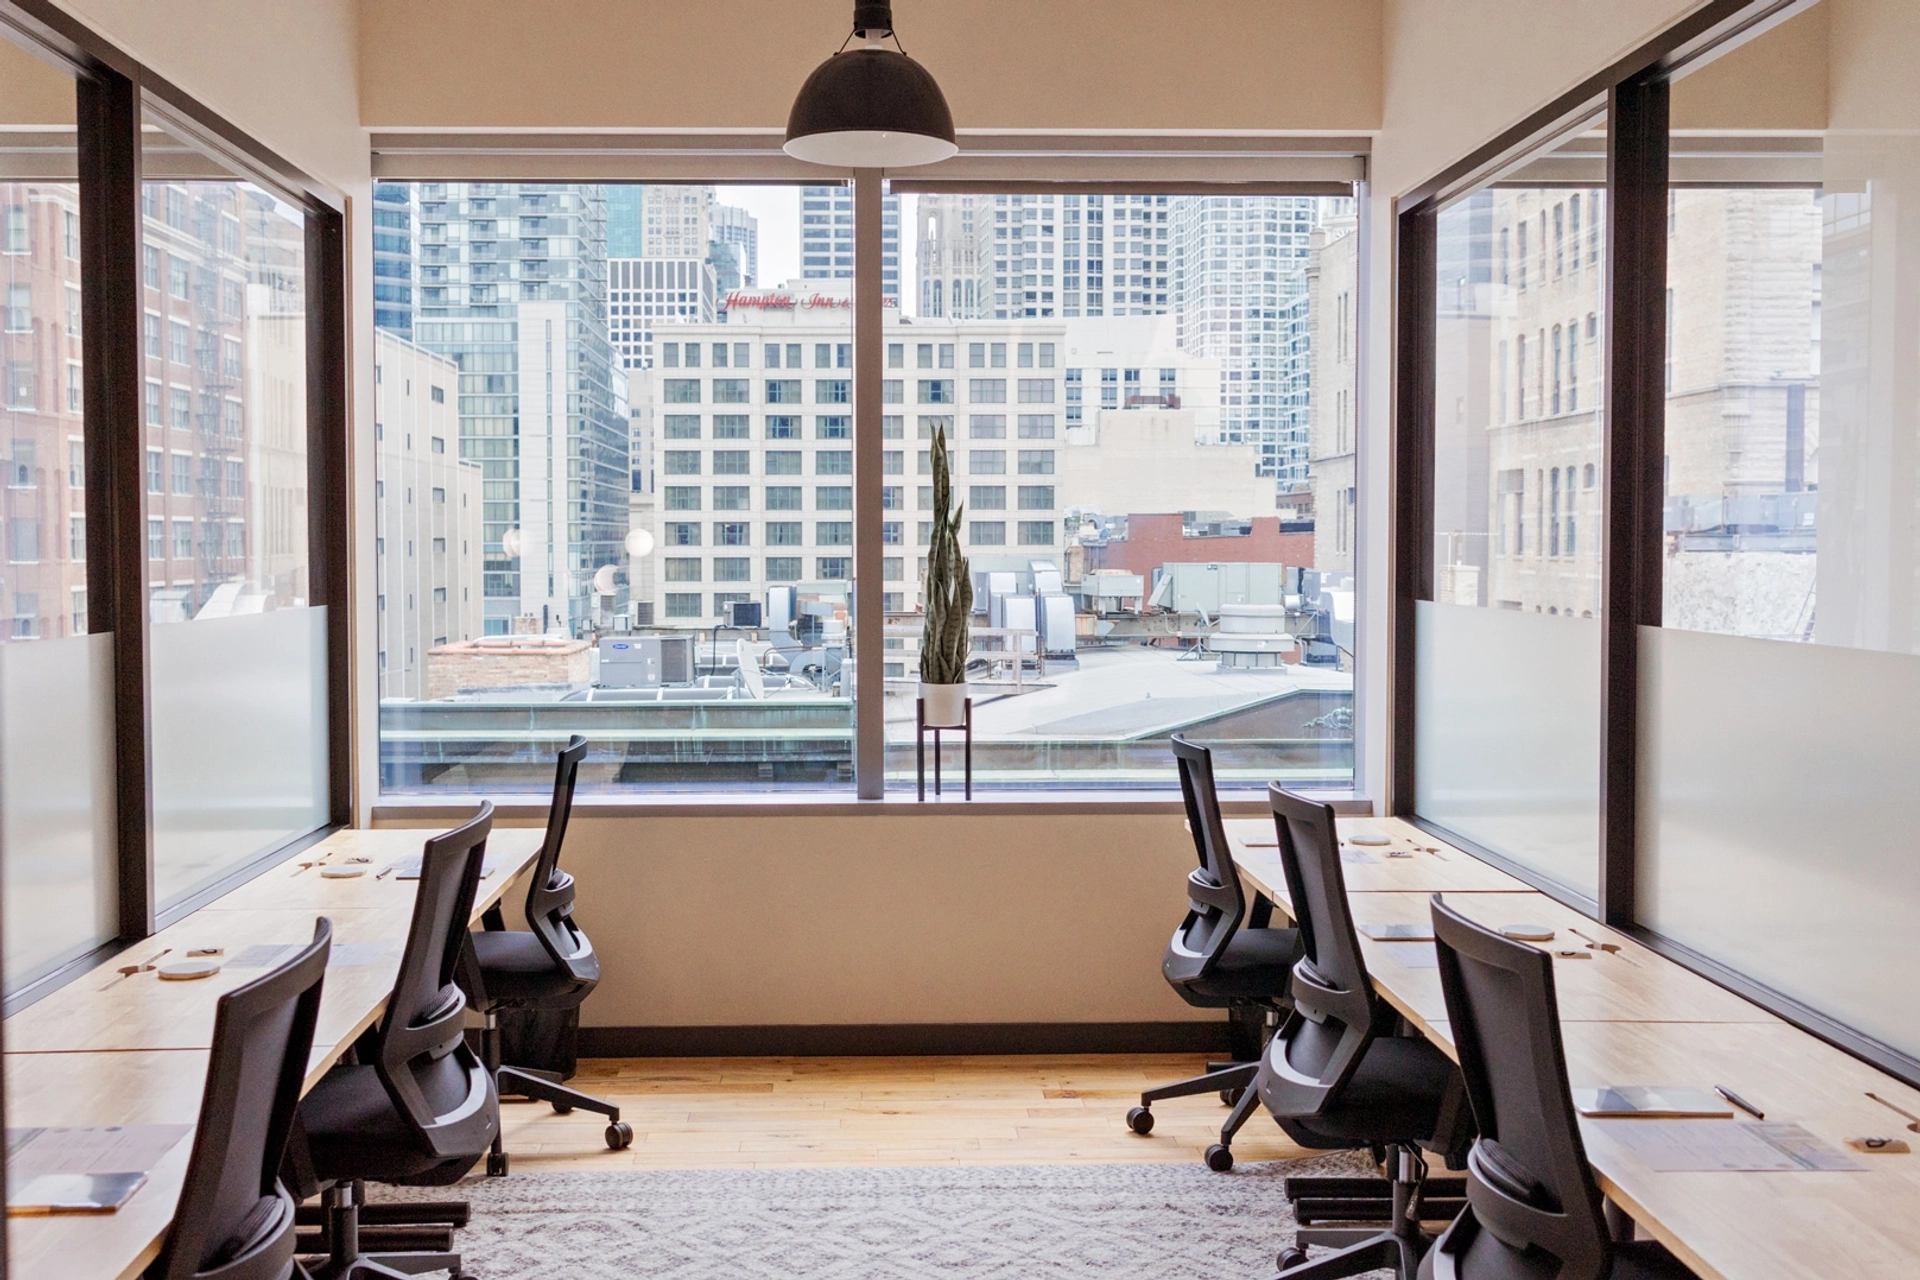 A spacious office with desks and a breathtaking view of the city.